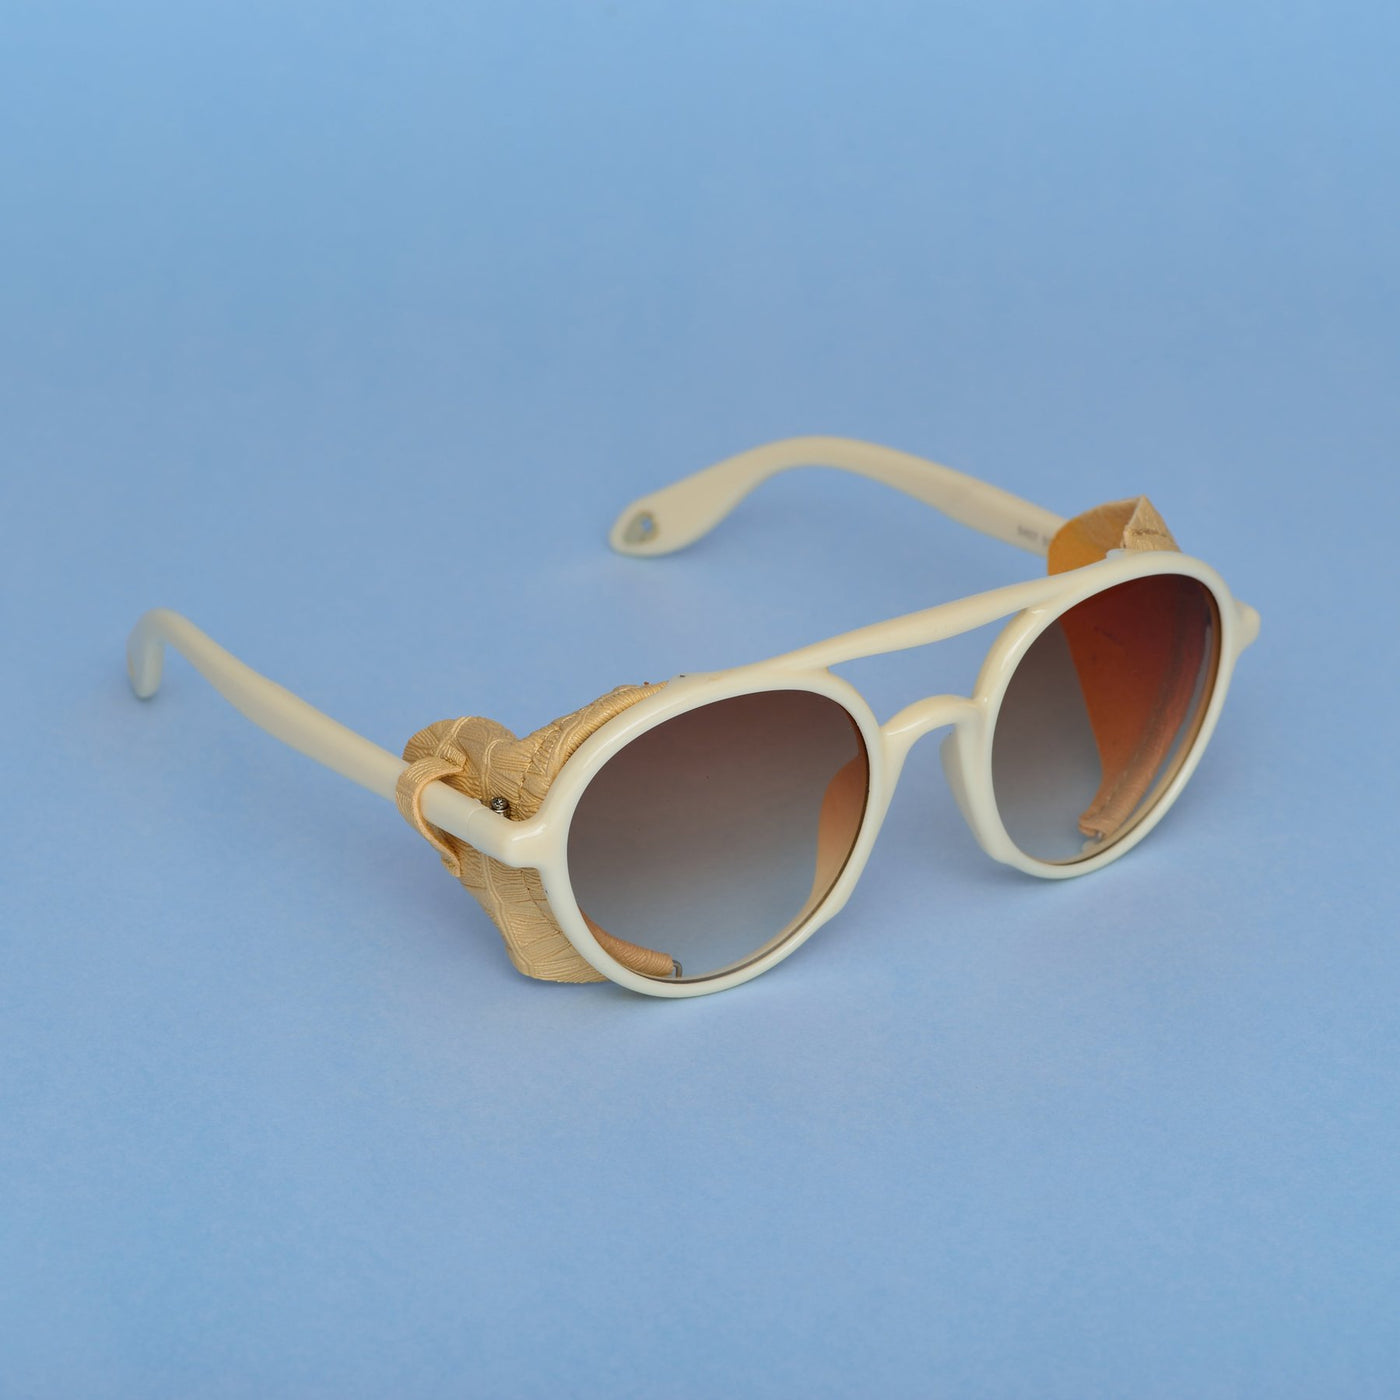 Round Brown And White Sunglasses For Men And Women-Unique and Classy